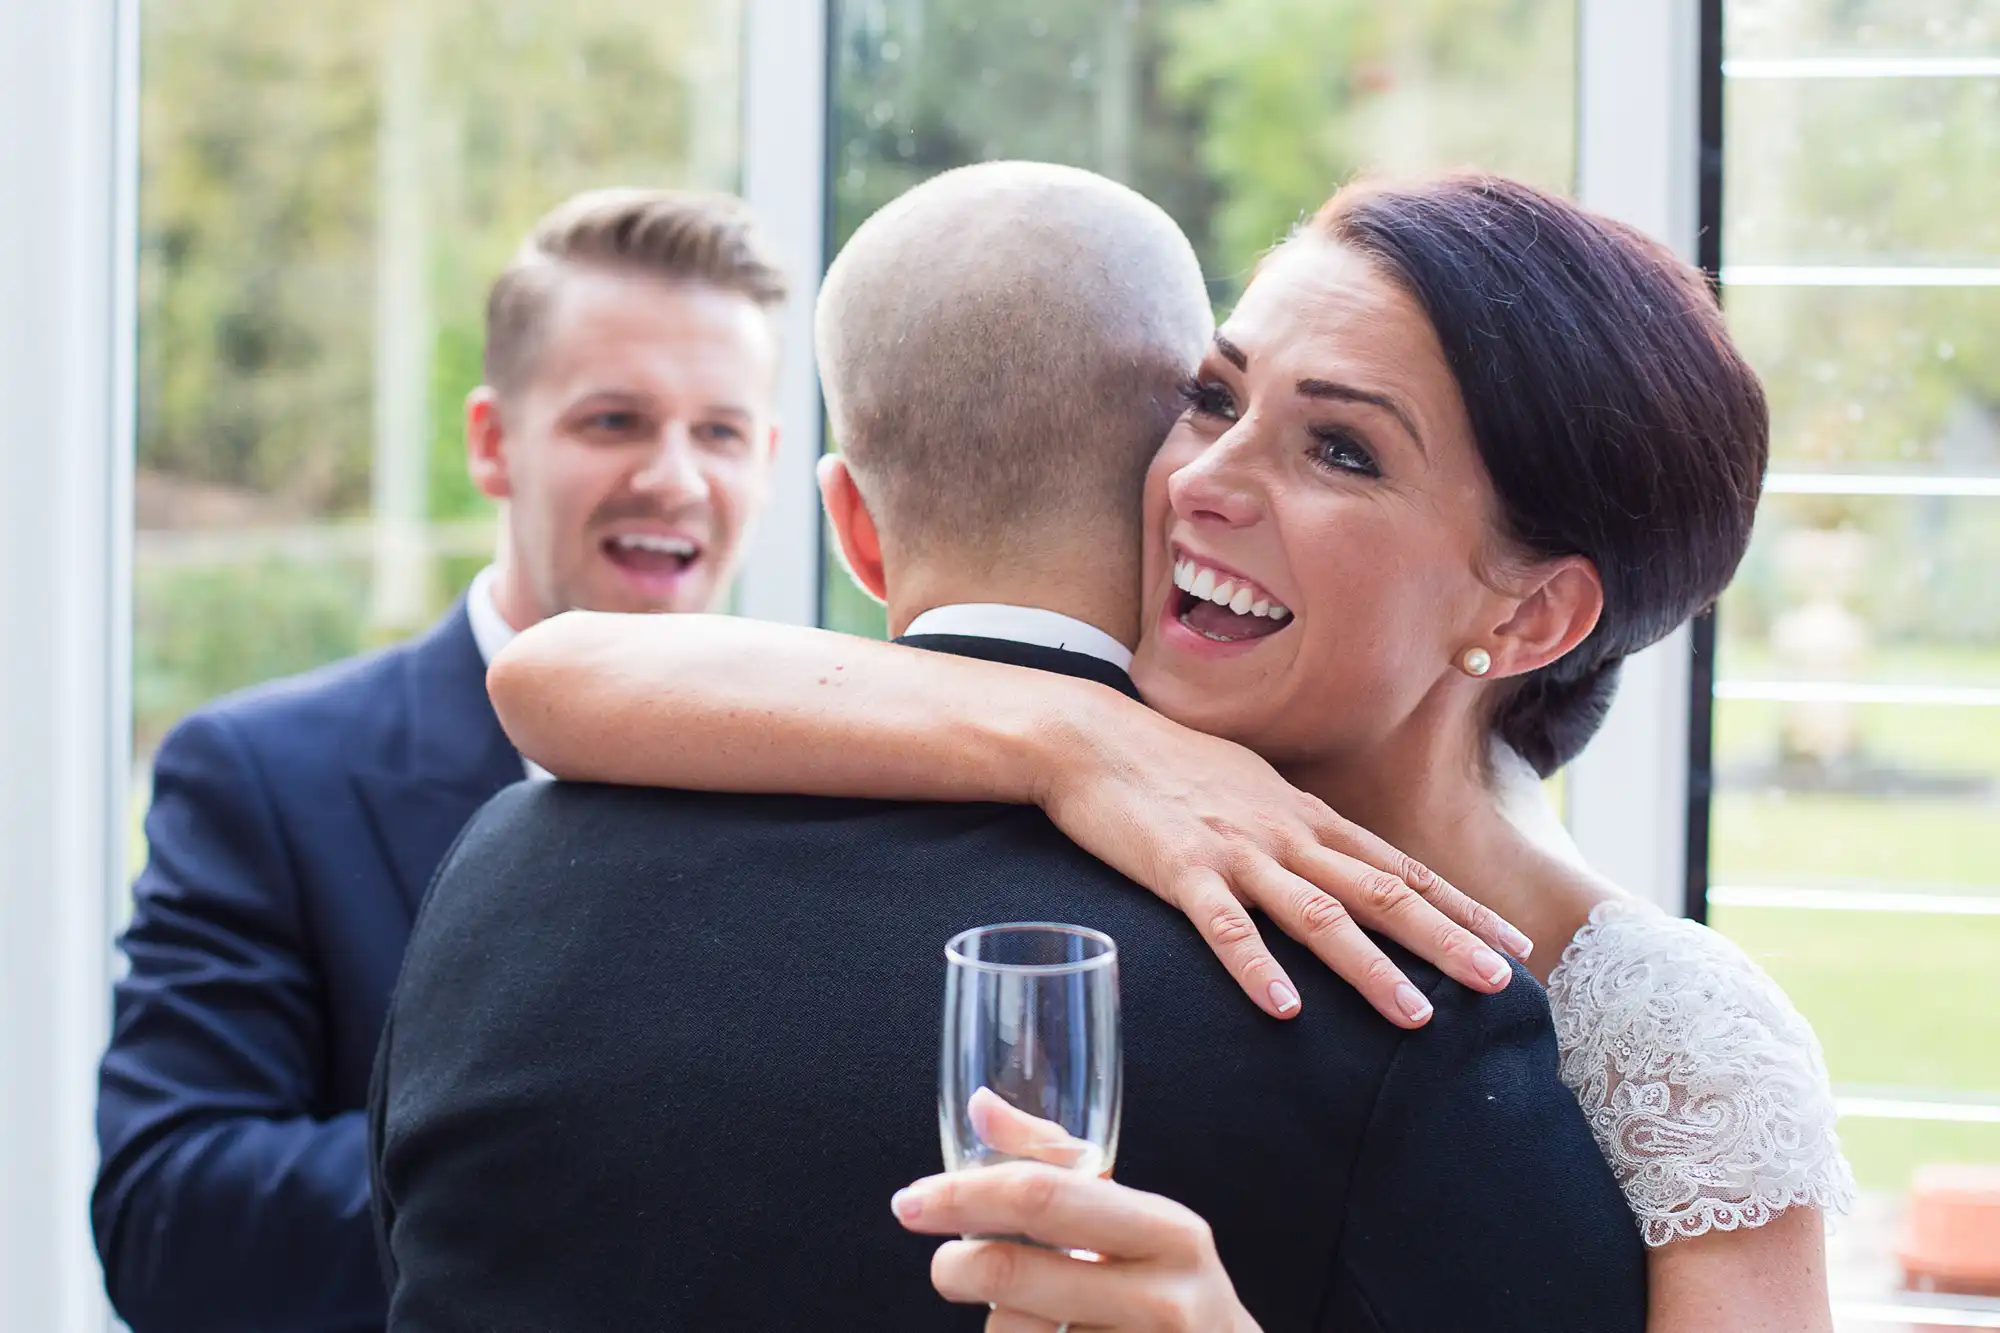 A woman with a glass of wine embracing a bald man at a gathering, smiling joyfully, while a young man in the background watches, also smiling.